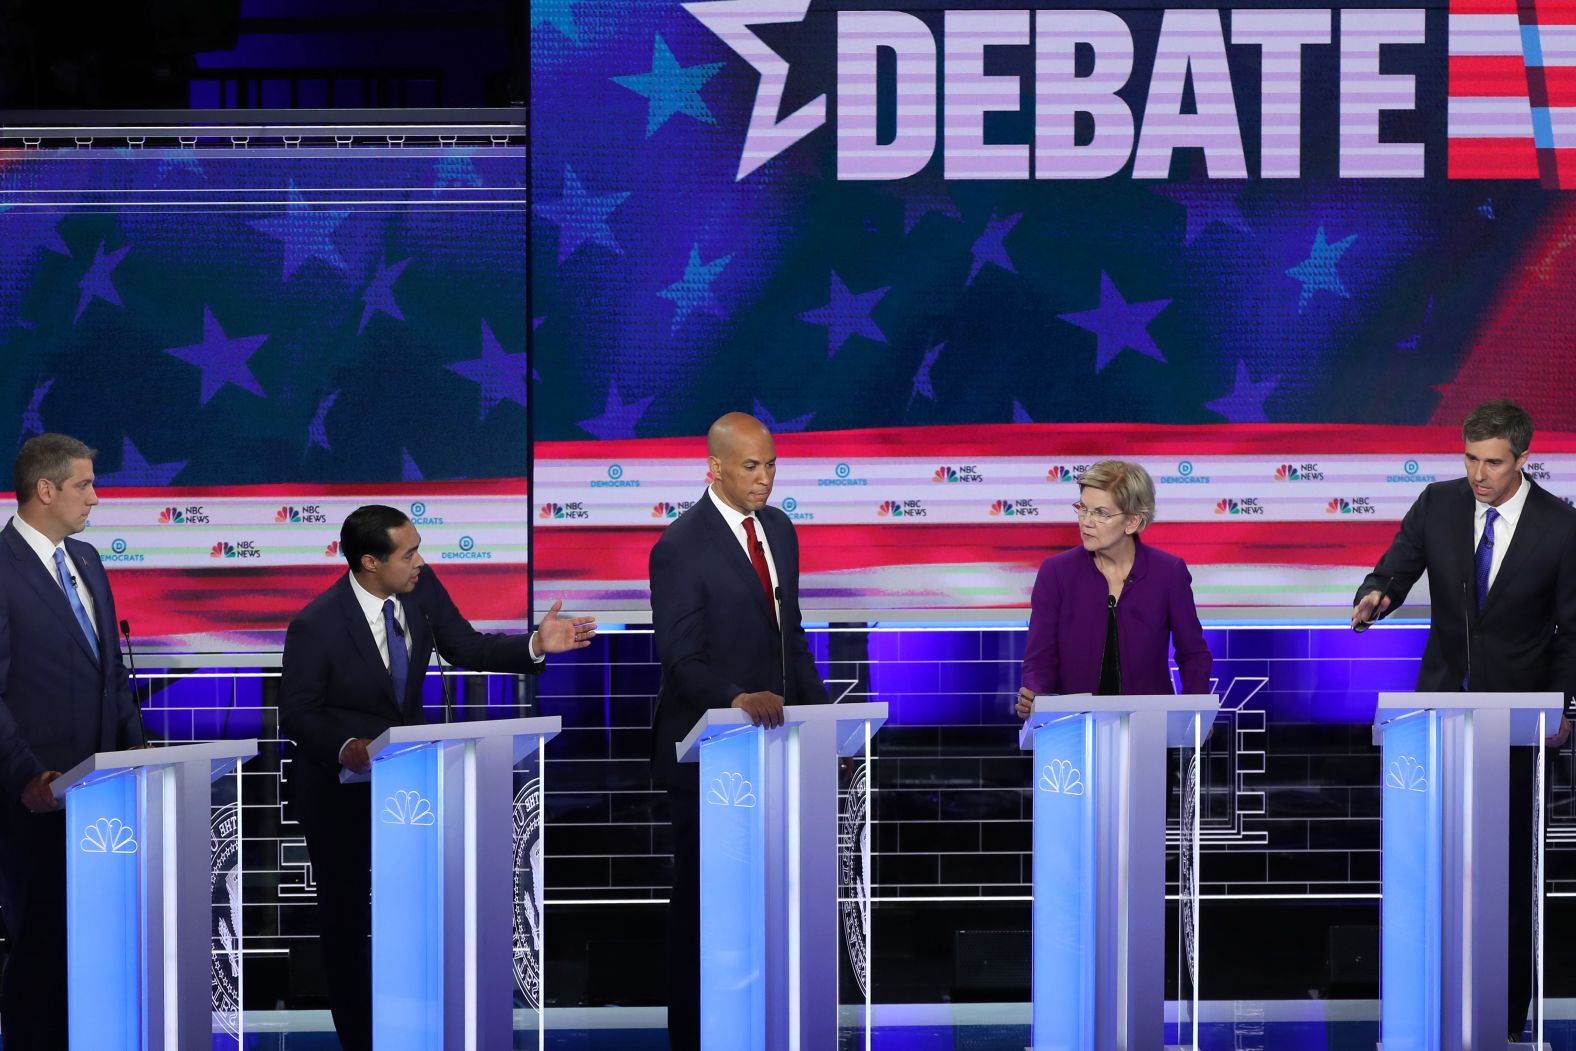 Castro, second from left, clashed with O'Rourke, right, early in Wednesday's debate. It was by far <a href="index.php?page=&url=https%3A%2F%2Fwww.cnn.com%2Fpolitics%2Flive-news%2Fdemocratic-debate-june-26-2019%2Fh_cb34a2de2e0ac068cc604f1965c3b41a" target="_blank">the most direct clash</a> of the first hour. <a href="index.php?page=&url=https%3A%2F%2Fwww.cnn.com%2Fpolitics%2Flive-news%2Fdemocratic-debate-june-26-2019%2Fh_4a681c71f5752541619b6cfa3eed4a88" target="_blank">Castro's goal was to poke holes in O'Rourke on immigration</a> — an issue that he has used at the center of his political identity. Both candidates are from Texas. O'Rourke is a former congressman from El Paso who rose to Democratic stardom in 2018 while challenging for the US Senate seat held by Ted Cruz. Castro was mayor of San Antonio before he became secretary of Housing and Urban Development.